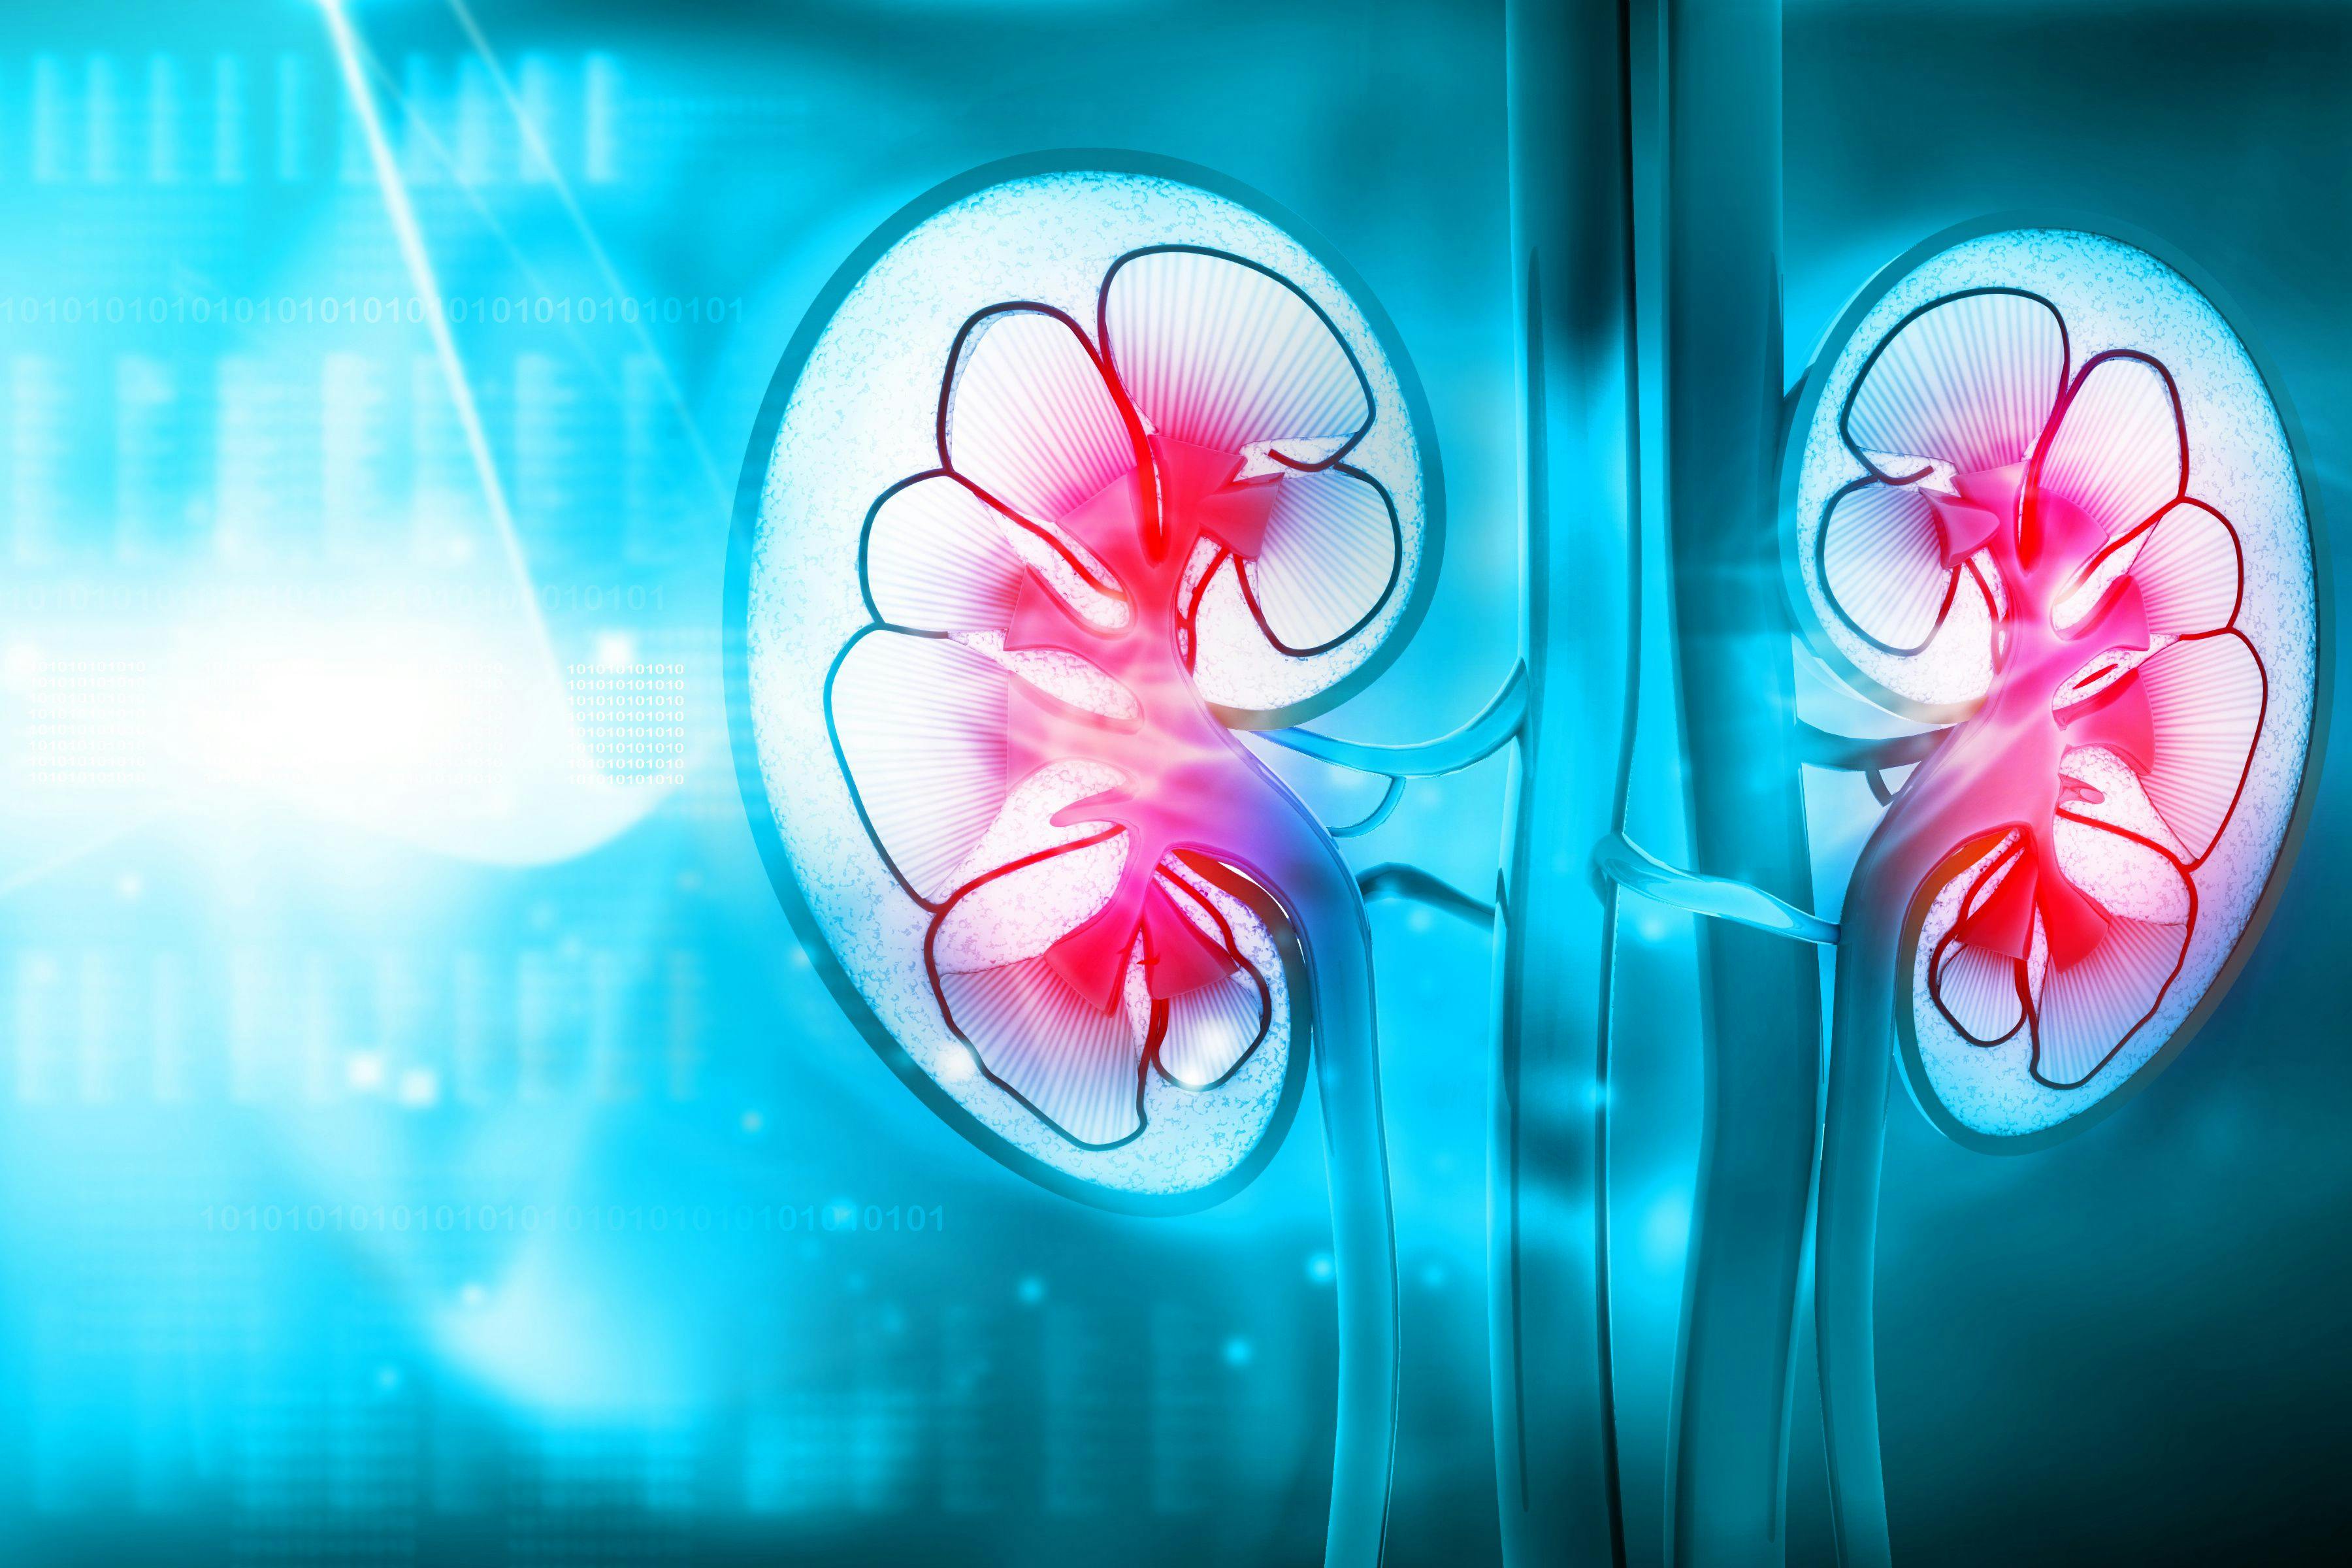 Kidney transplants in patients with Fabry disease has a high success rate